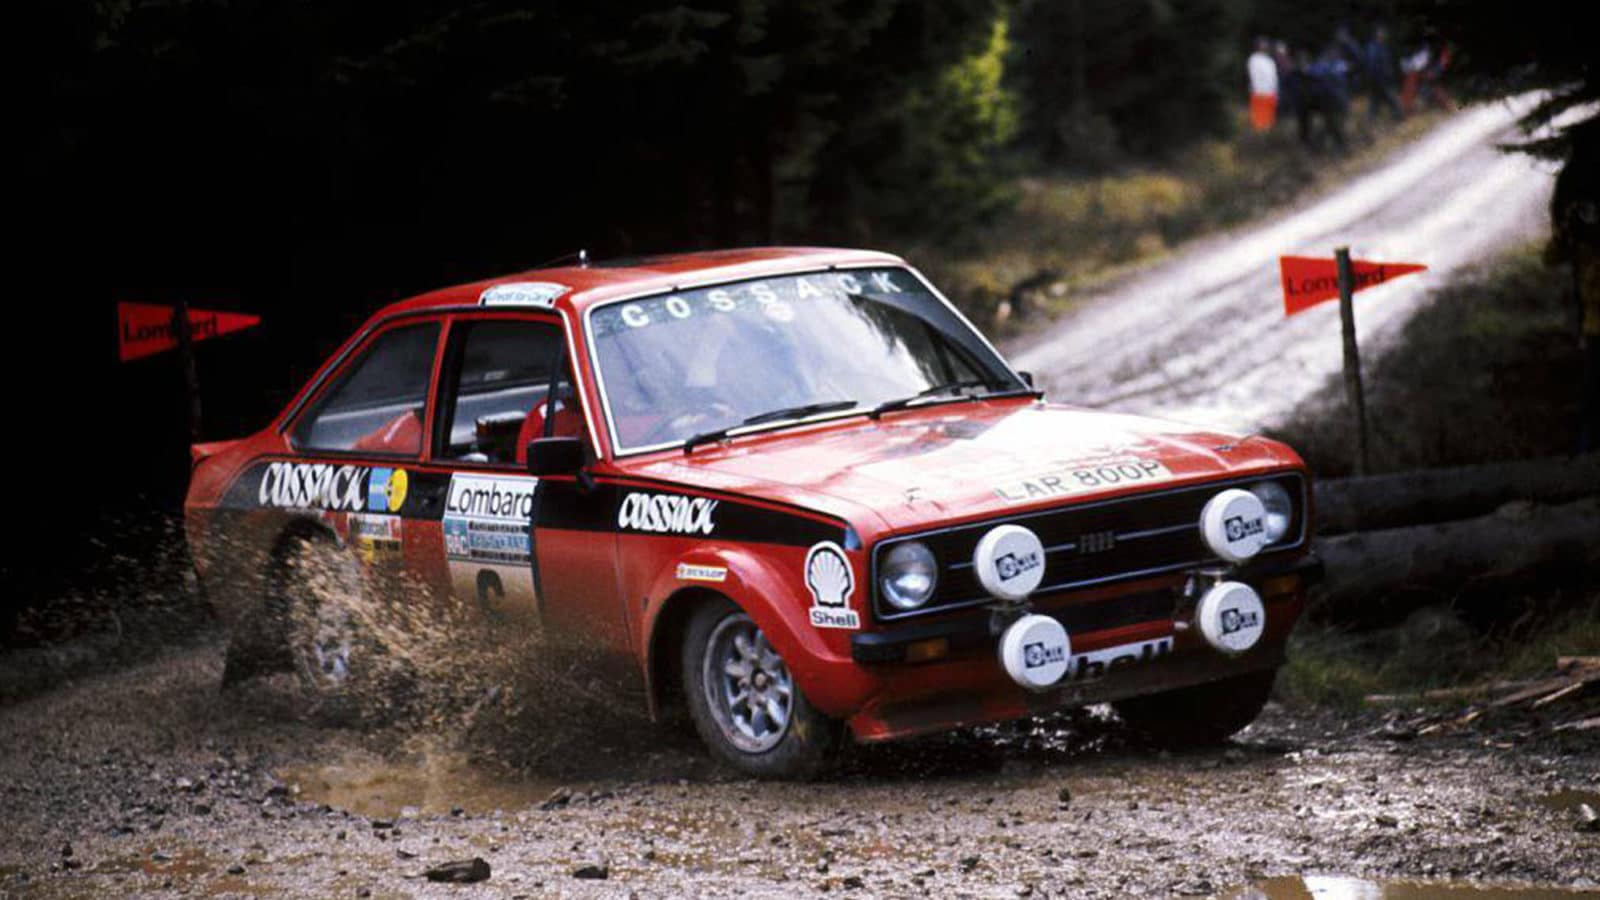 Ford Escort RS1800 of Roger Clark on 1975 RAC Rally